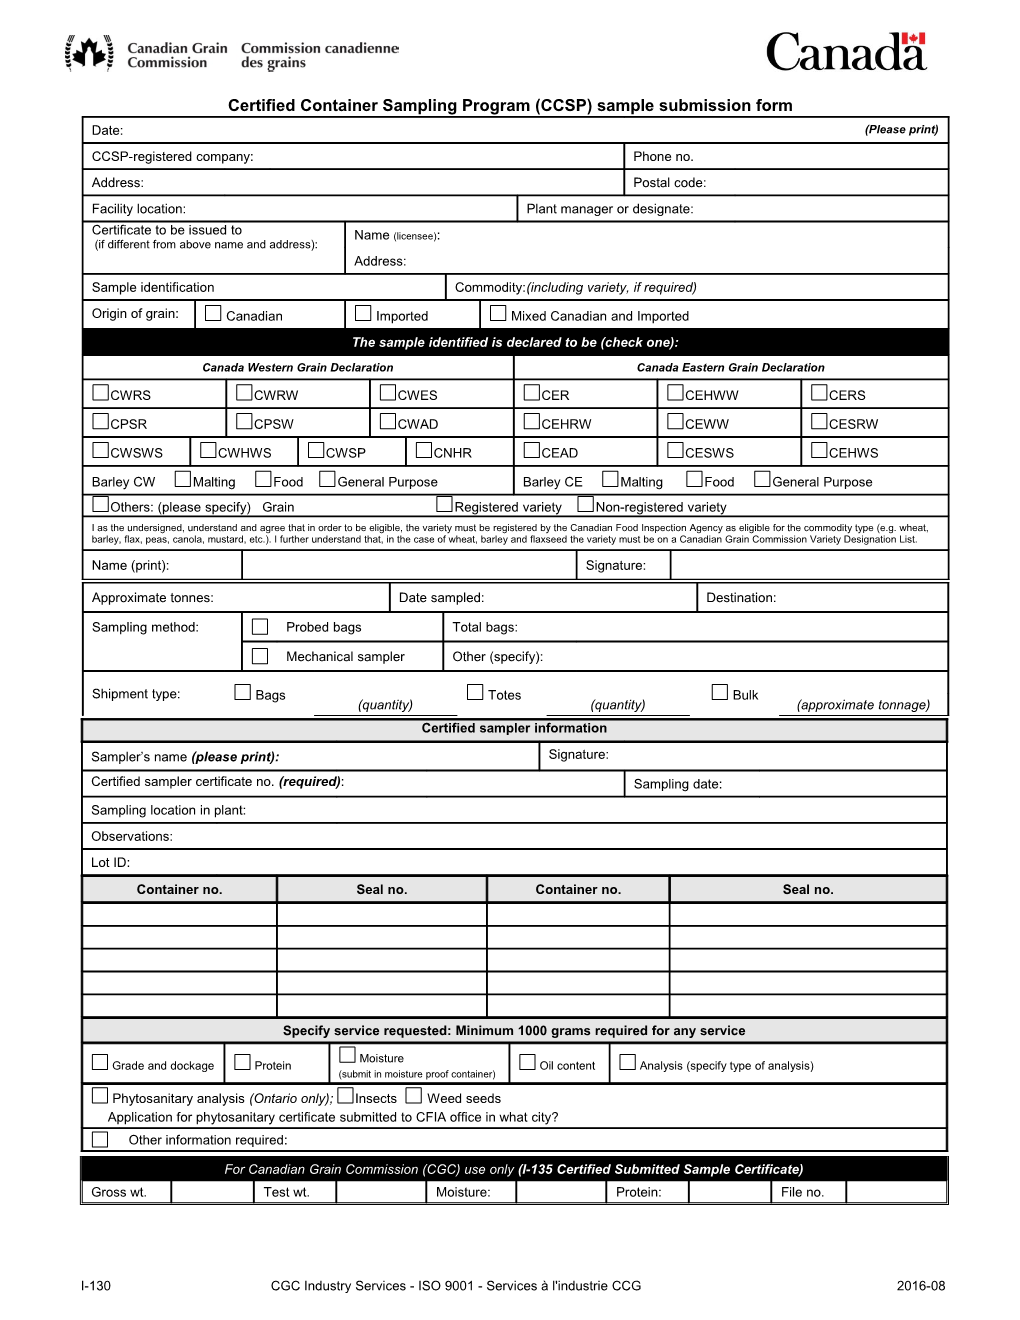 I-130 Certified Container Sampling Program (CCSP) Sample Submission Form